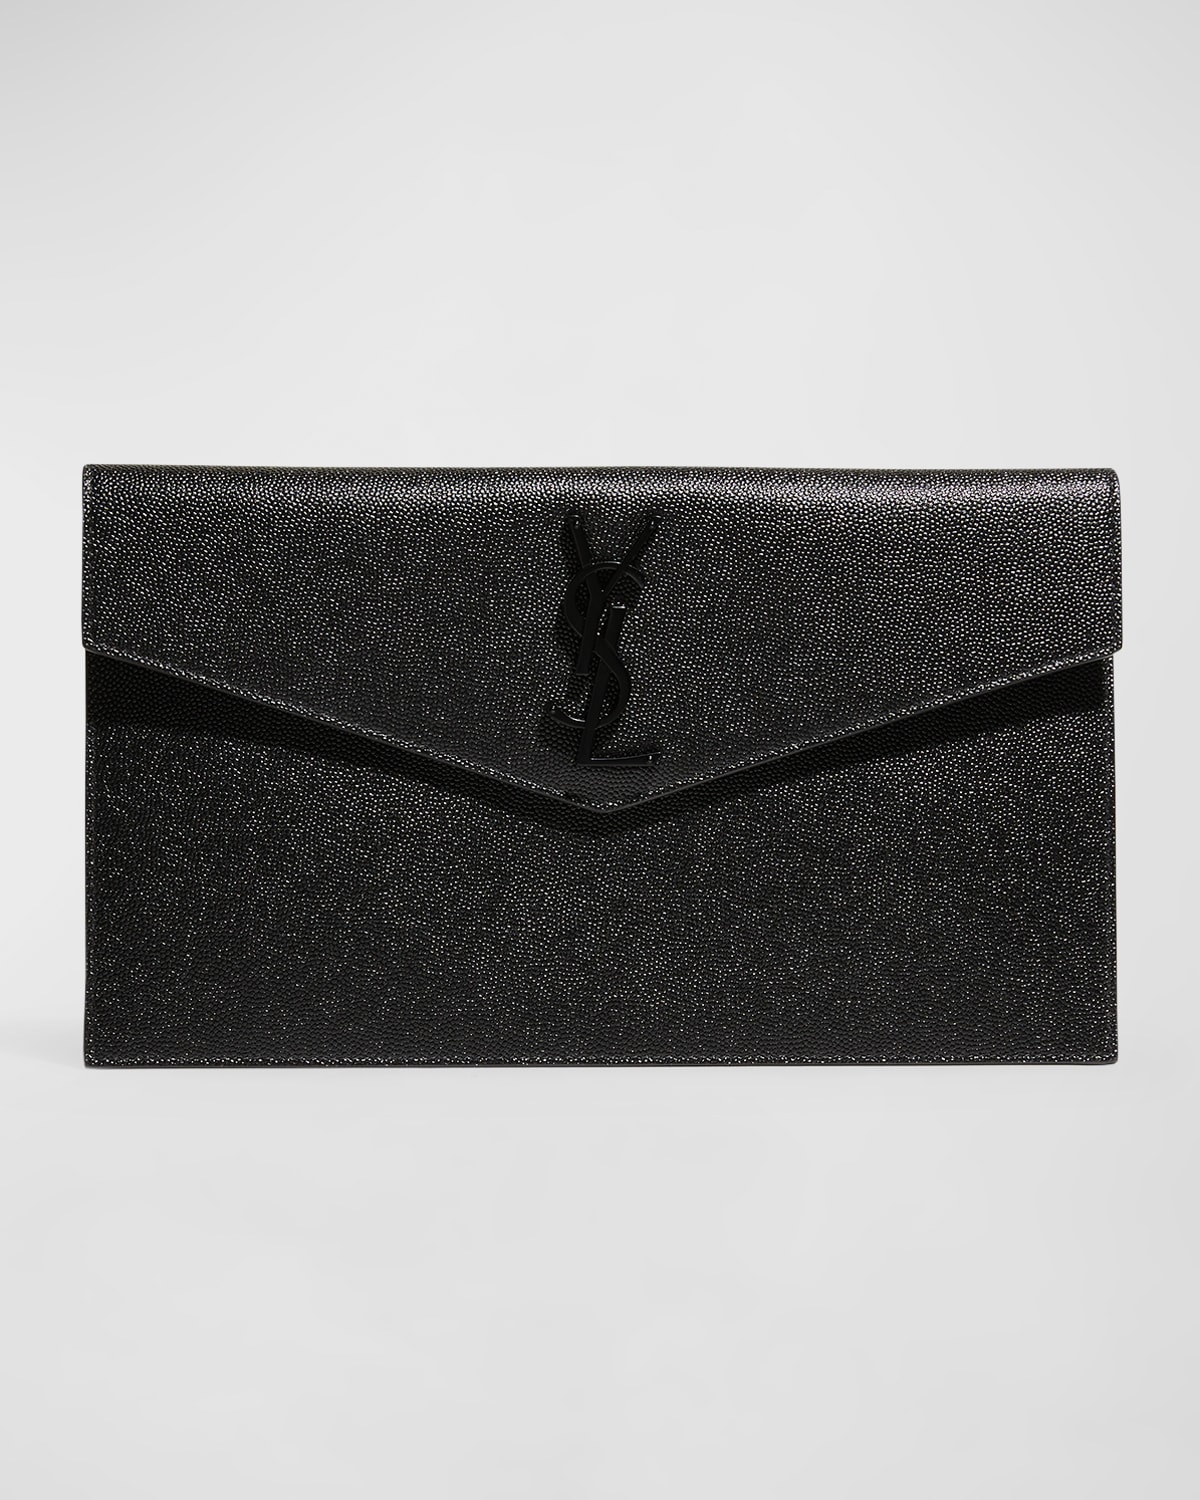 SAINT LAURENT UPTOWN YSL POUCH IN GRAINED LEATHER